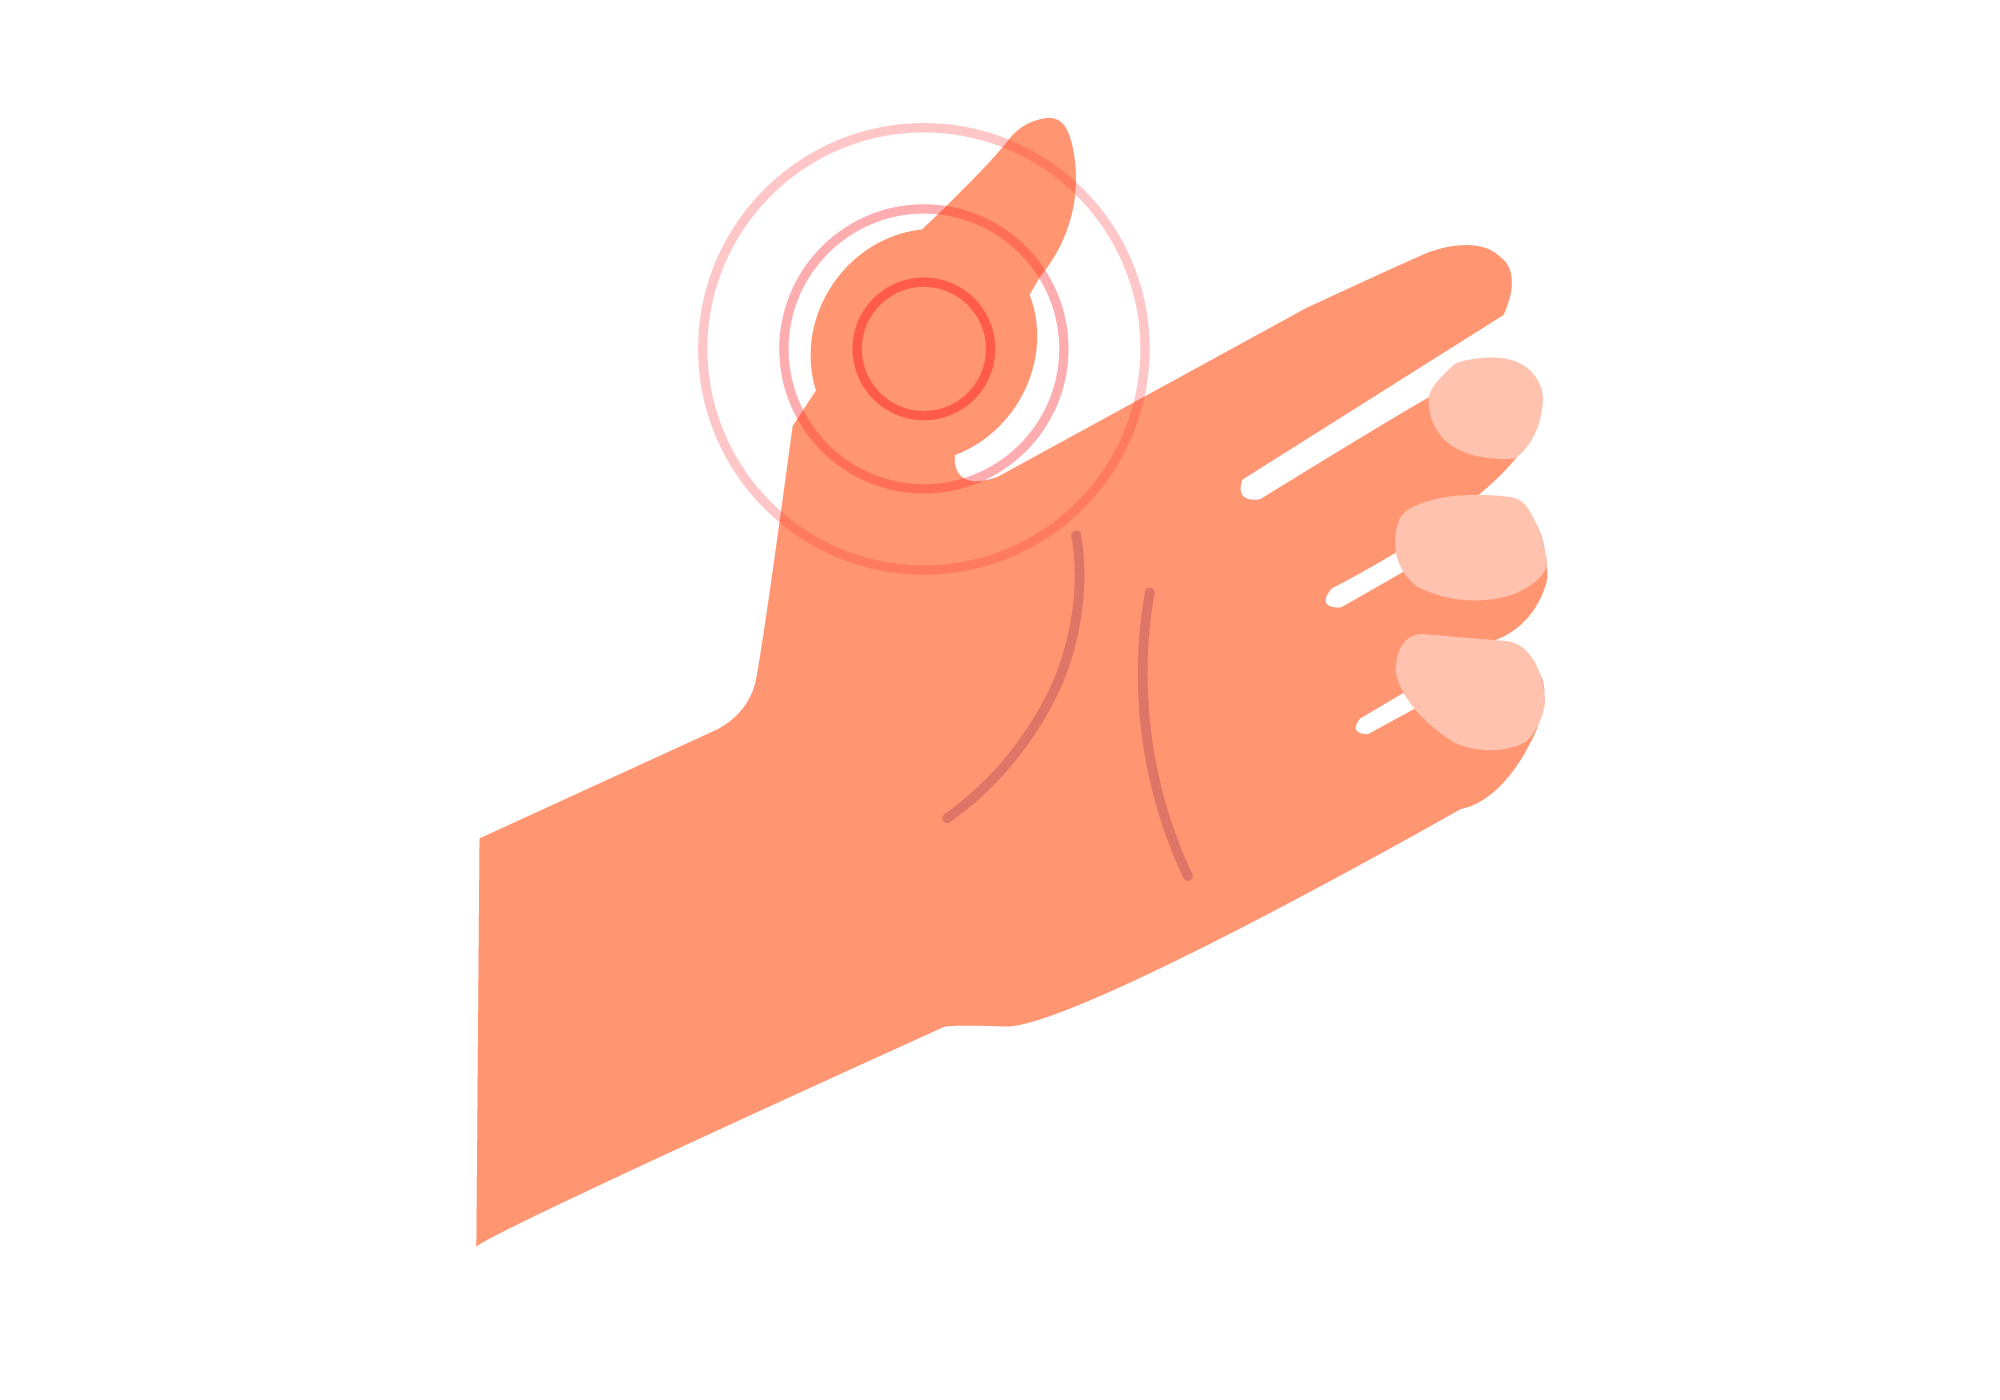 when you bring any of your fingers in contact with your thumb, this movement is called